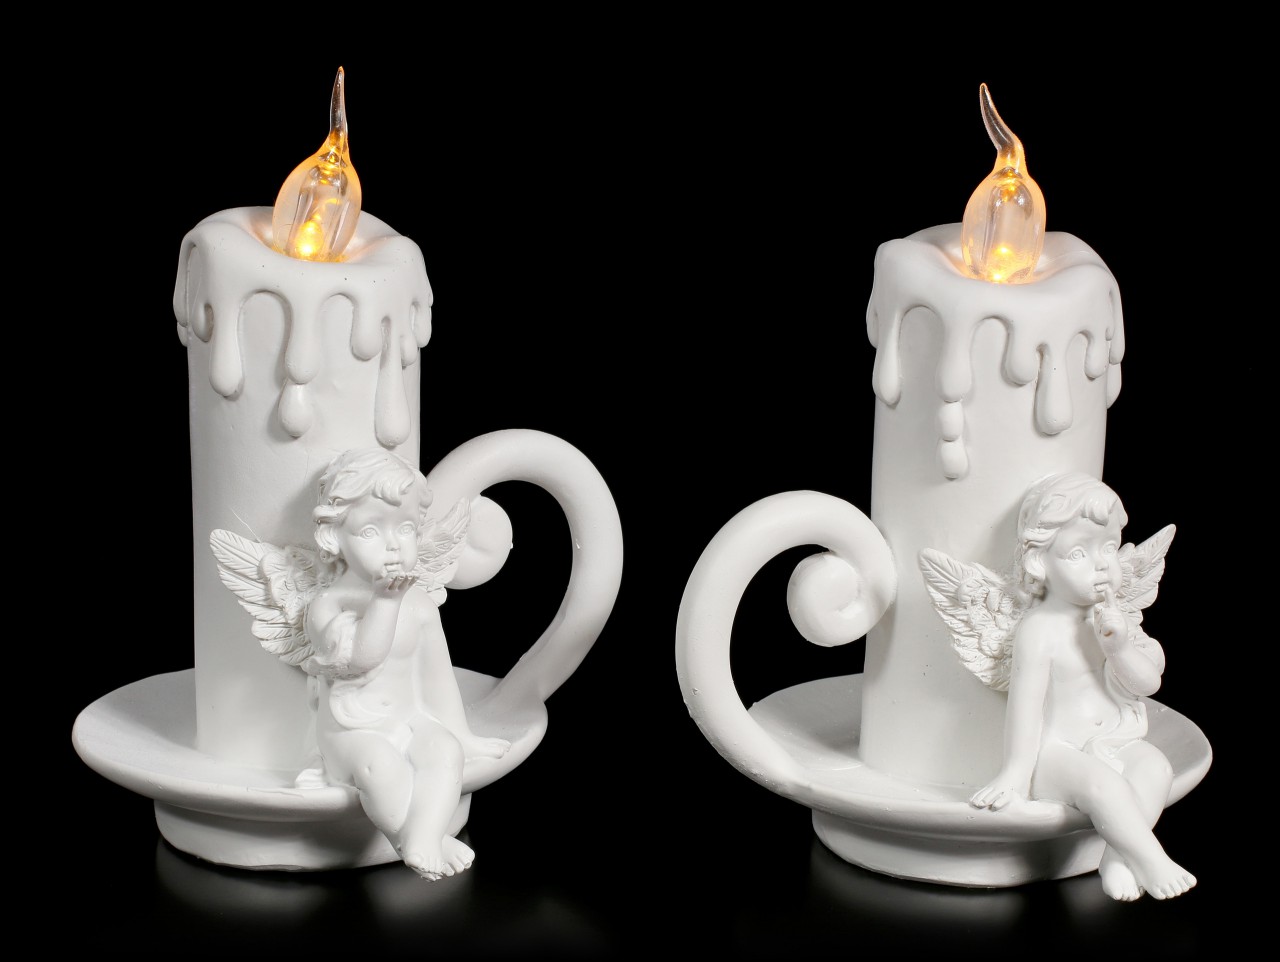 Cherubim Figurines with LED Candles - Set of 2